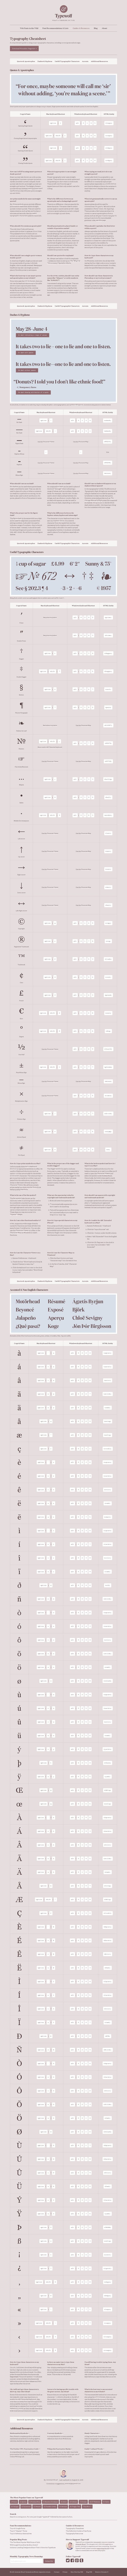 Typography Cheatsheet—A Comprehensive Guide to Smart Quotes, Dashes & Other Typographic Character…